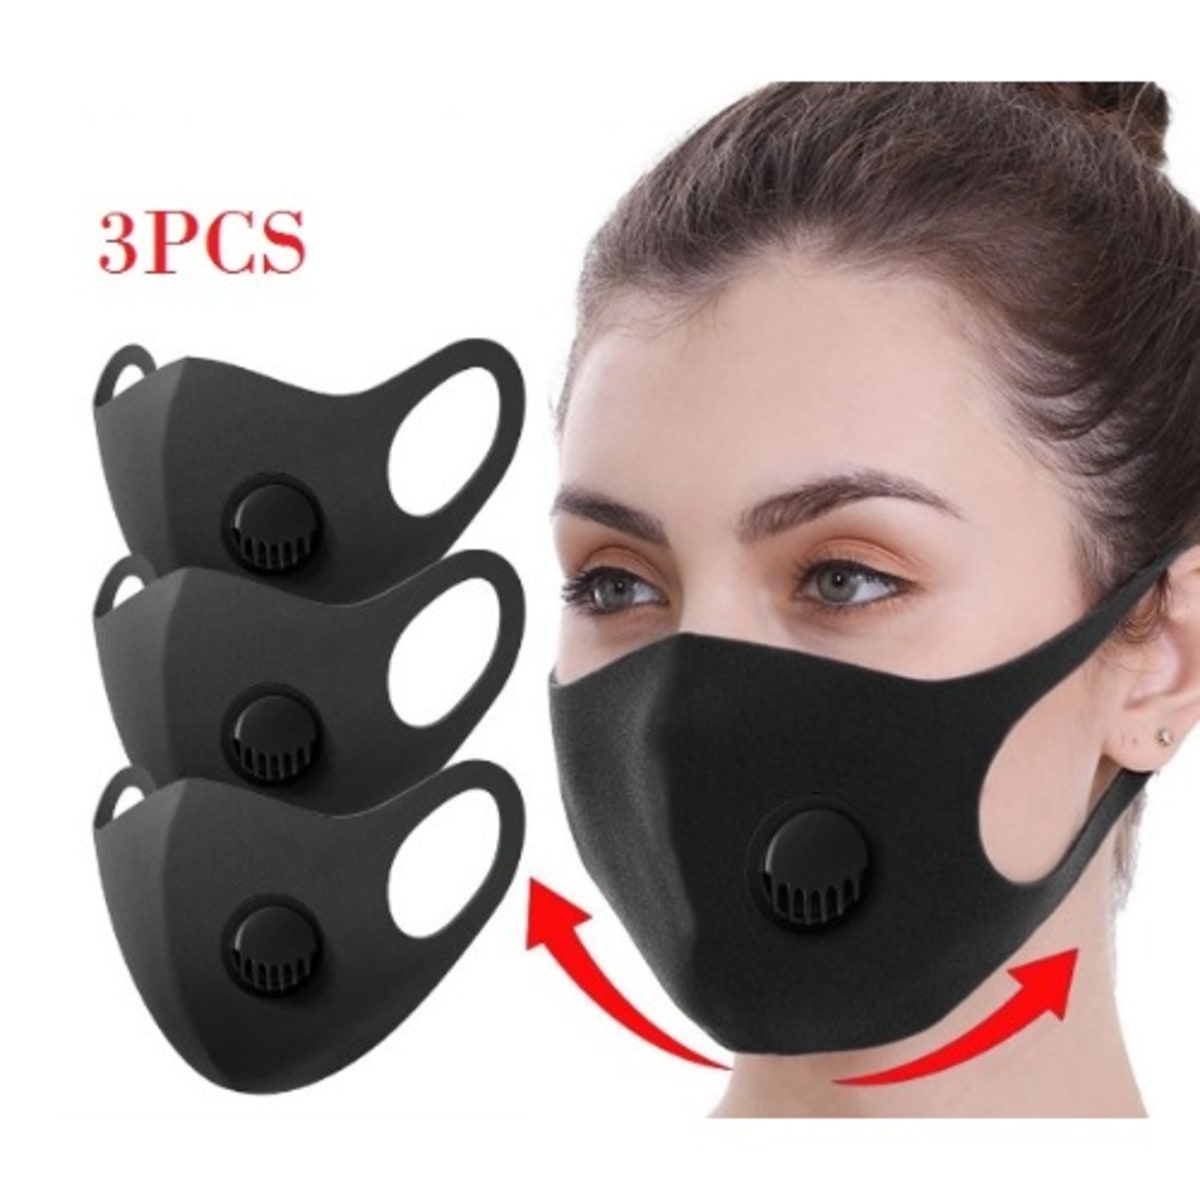 Double Protection Face Mask With Breathing Valve - 3 Pieces